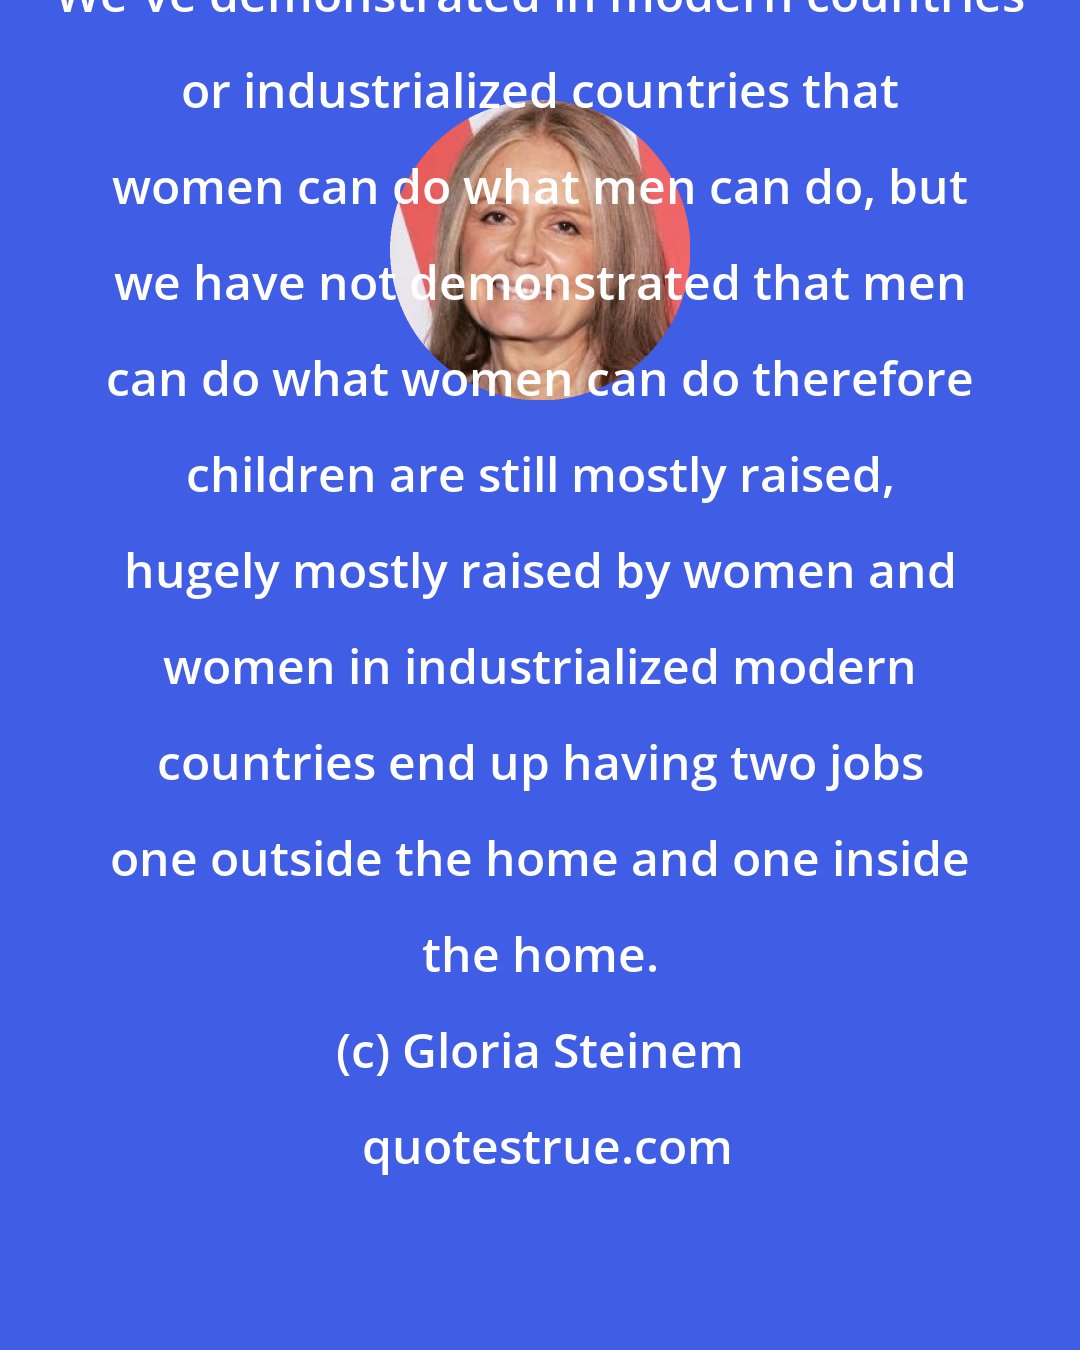 Gloria Steinem: We've demonstrated in modern countries or industrialized countries that women can do what men can do, but we have not demonstrated that men can do what women can do therefore children are still mostly raised, hugely mostly raised by women and women in industrialized modern countries end up having two jobs one outside the home and one inside the home.